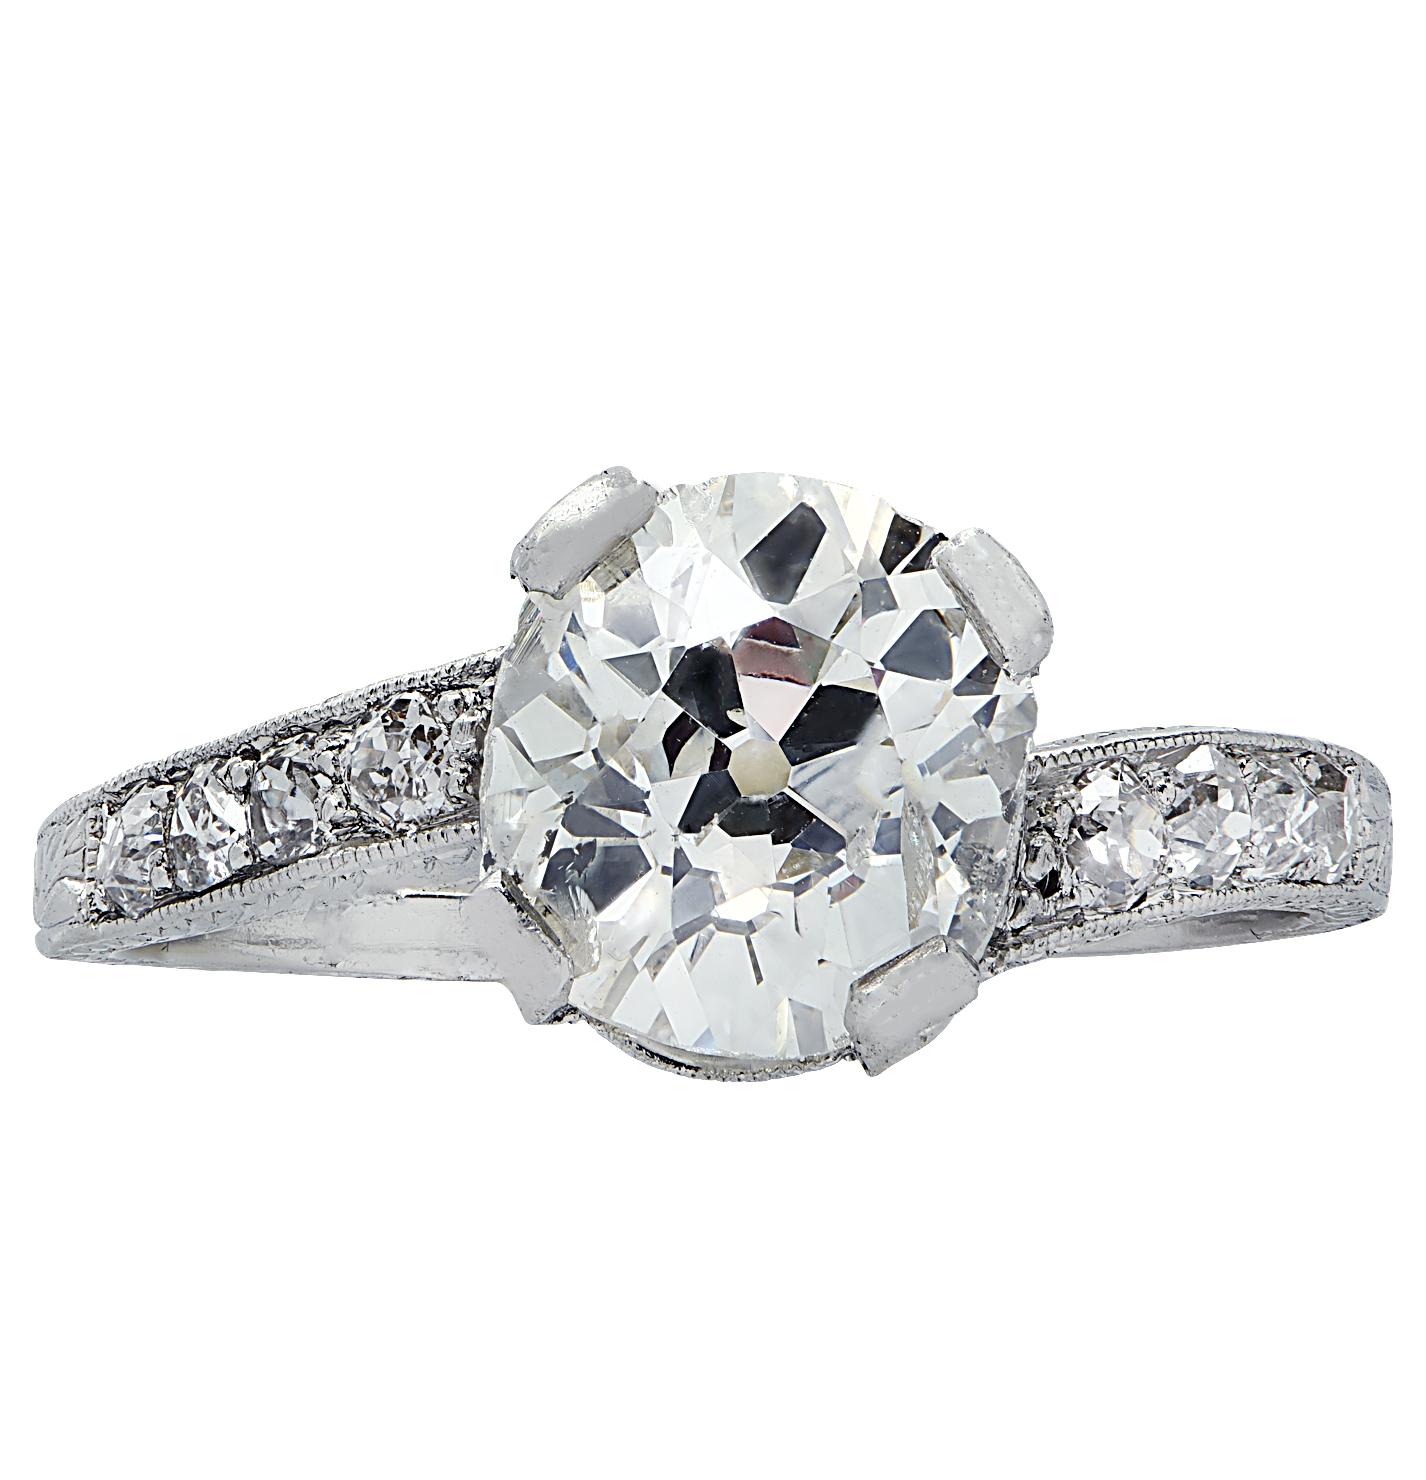 Stunning Art Deco Ring crafted in platinum, showcasing a spectacular old miner cushion cut diamond weighing 1.81 carats, H-I color, and SI clarity. This sensational ring measures 8.17 mm in length, 7.2 mm in width, weighs 3.6 grams and is a size